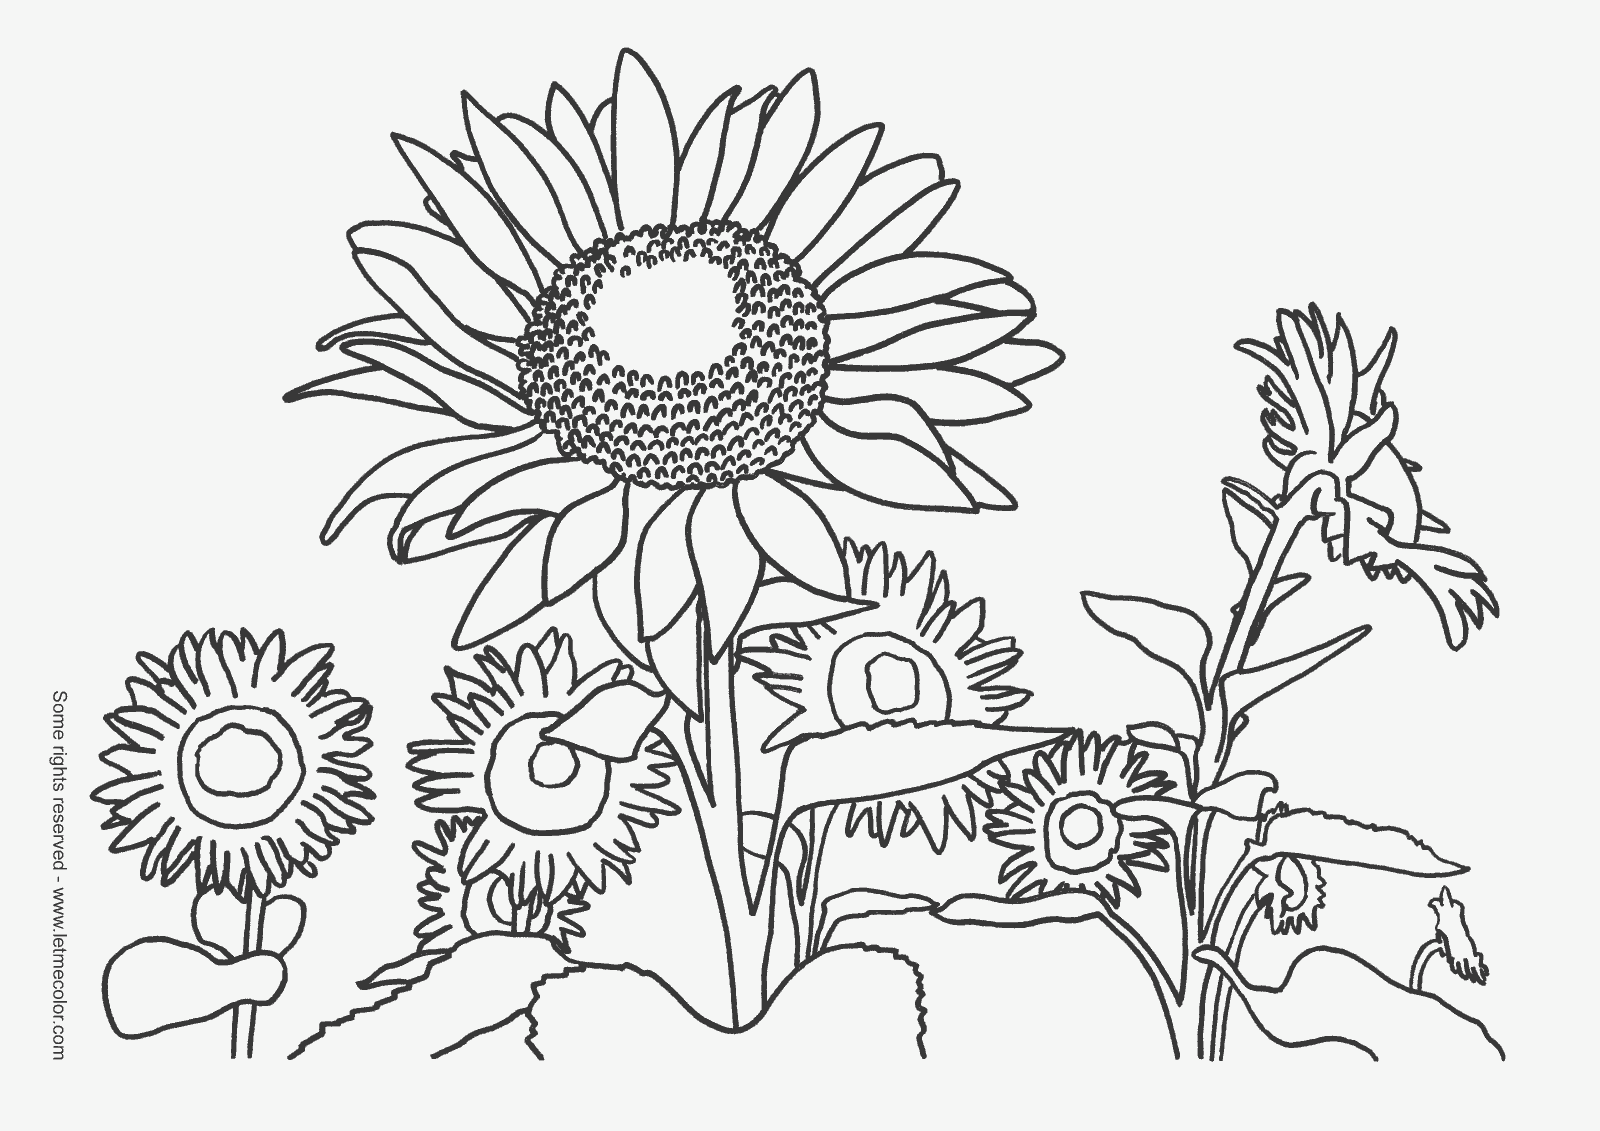 sunflower color sheet sunflower coloring pages to download and print for free sunflower sheet color 